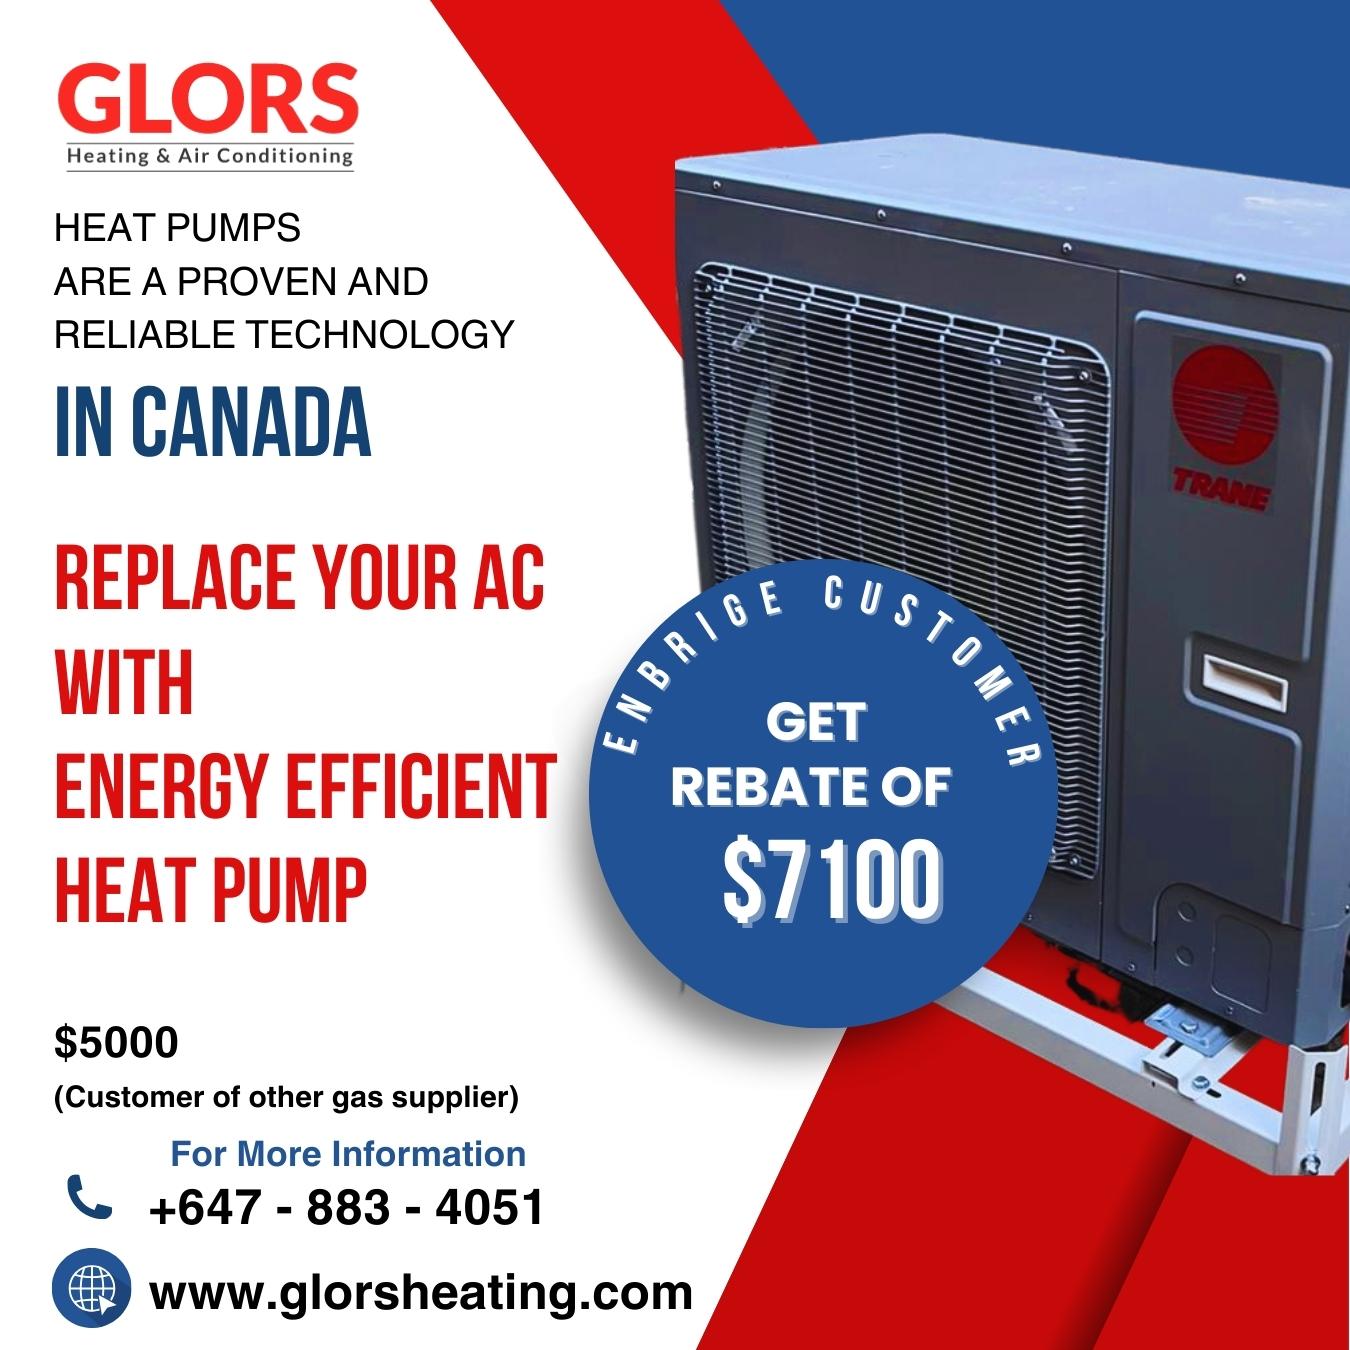 Replace your ac with energy efficient heat pump!